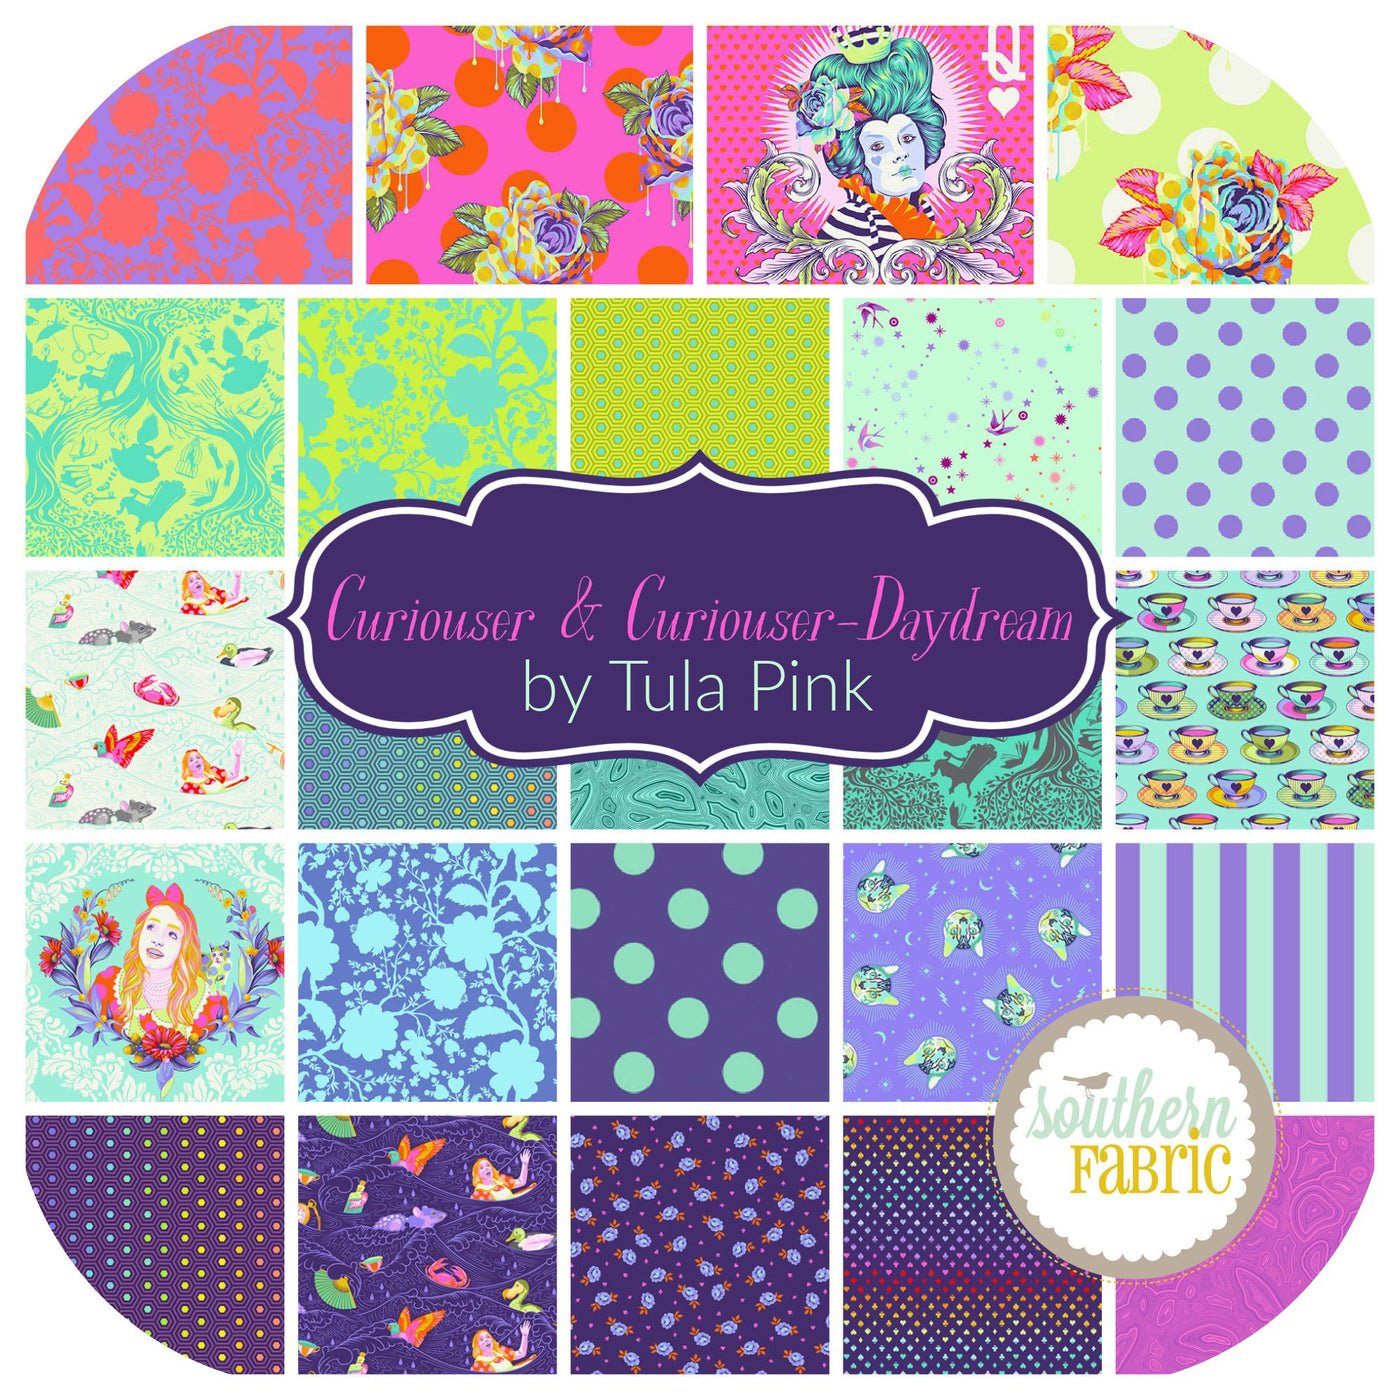 Curiouser and Curiouser - Day Dream Fat Quarter Bundle (24 pcs) by Tula Pink for Free Spirit